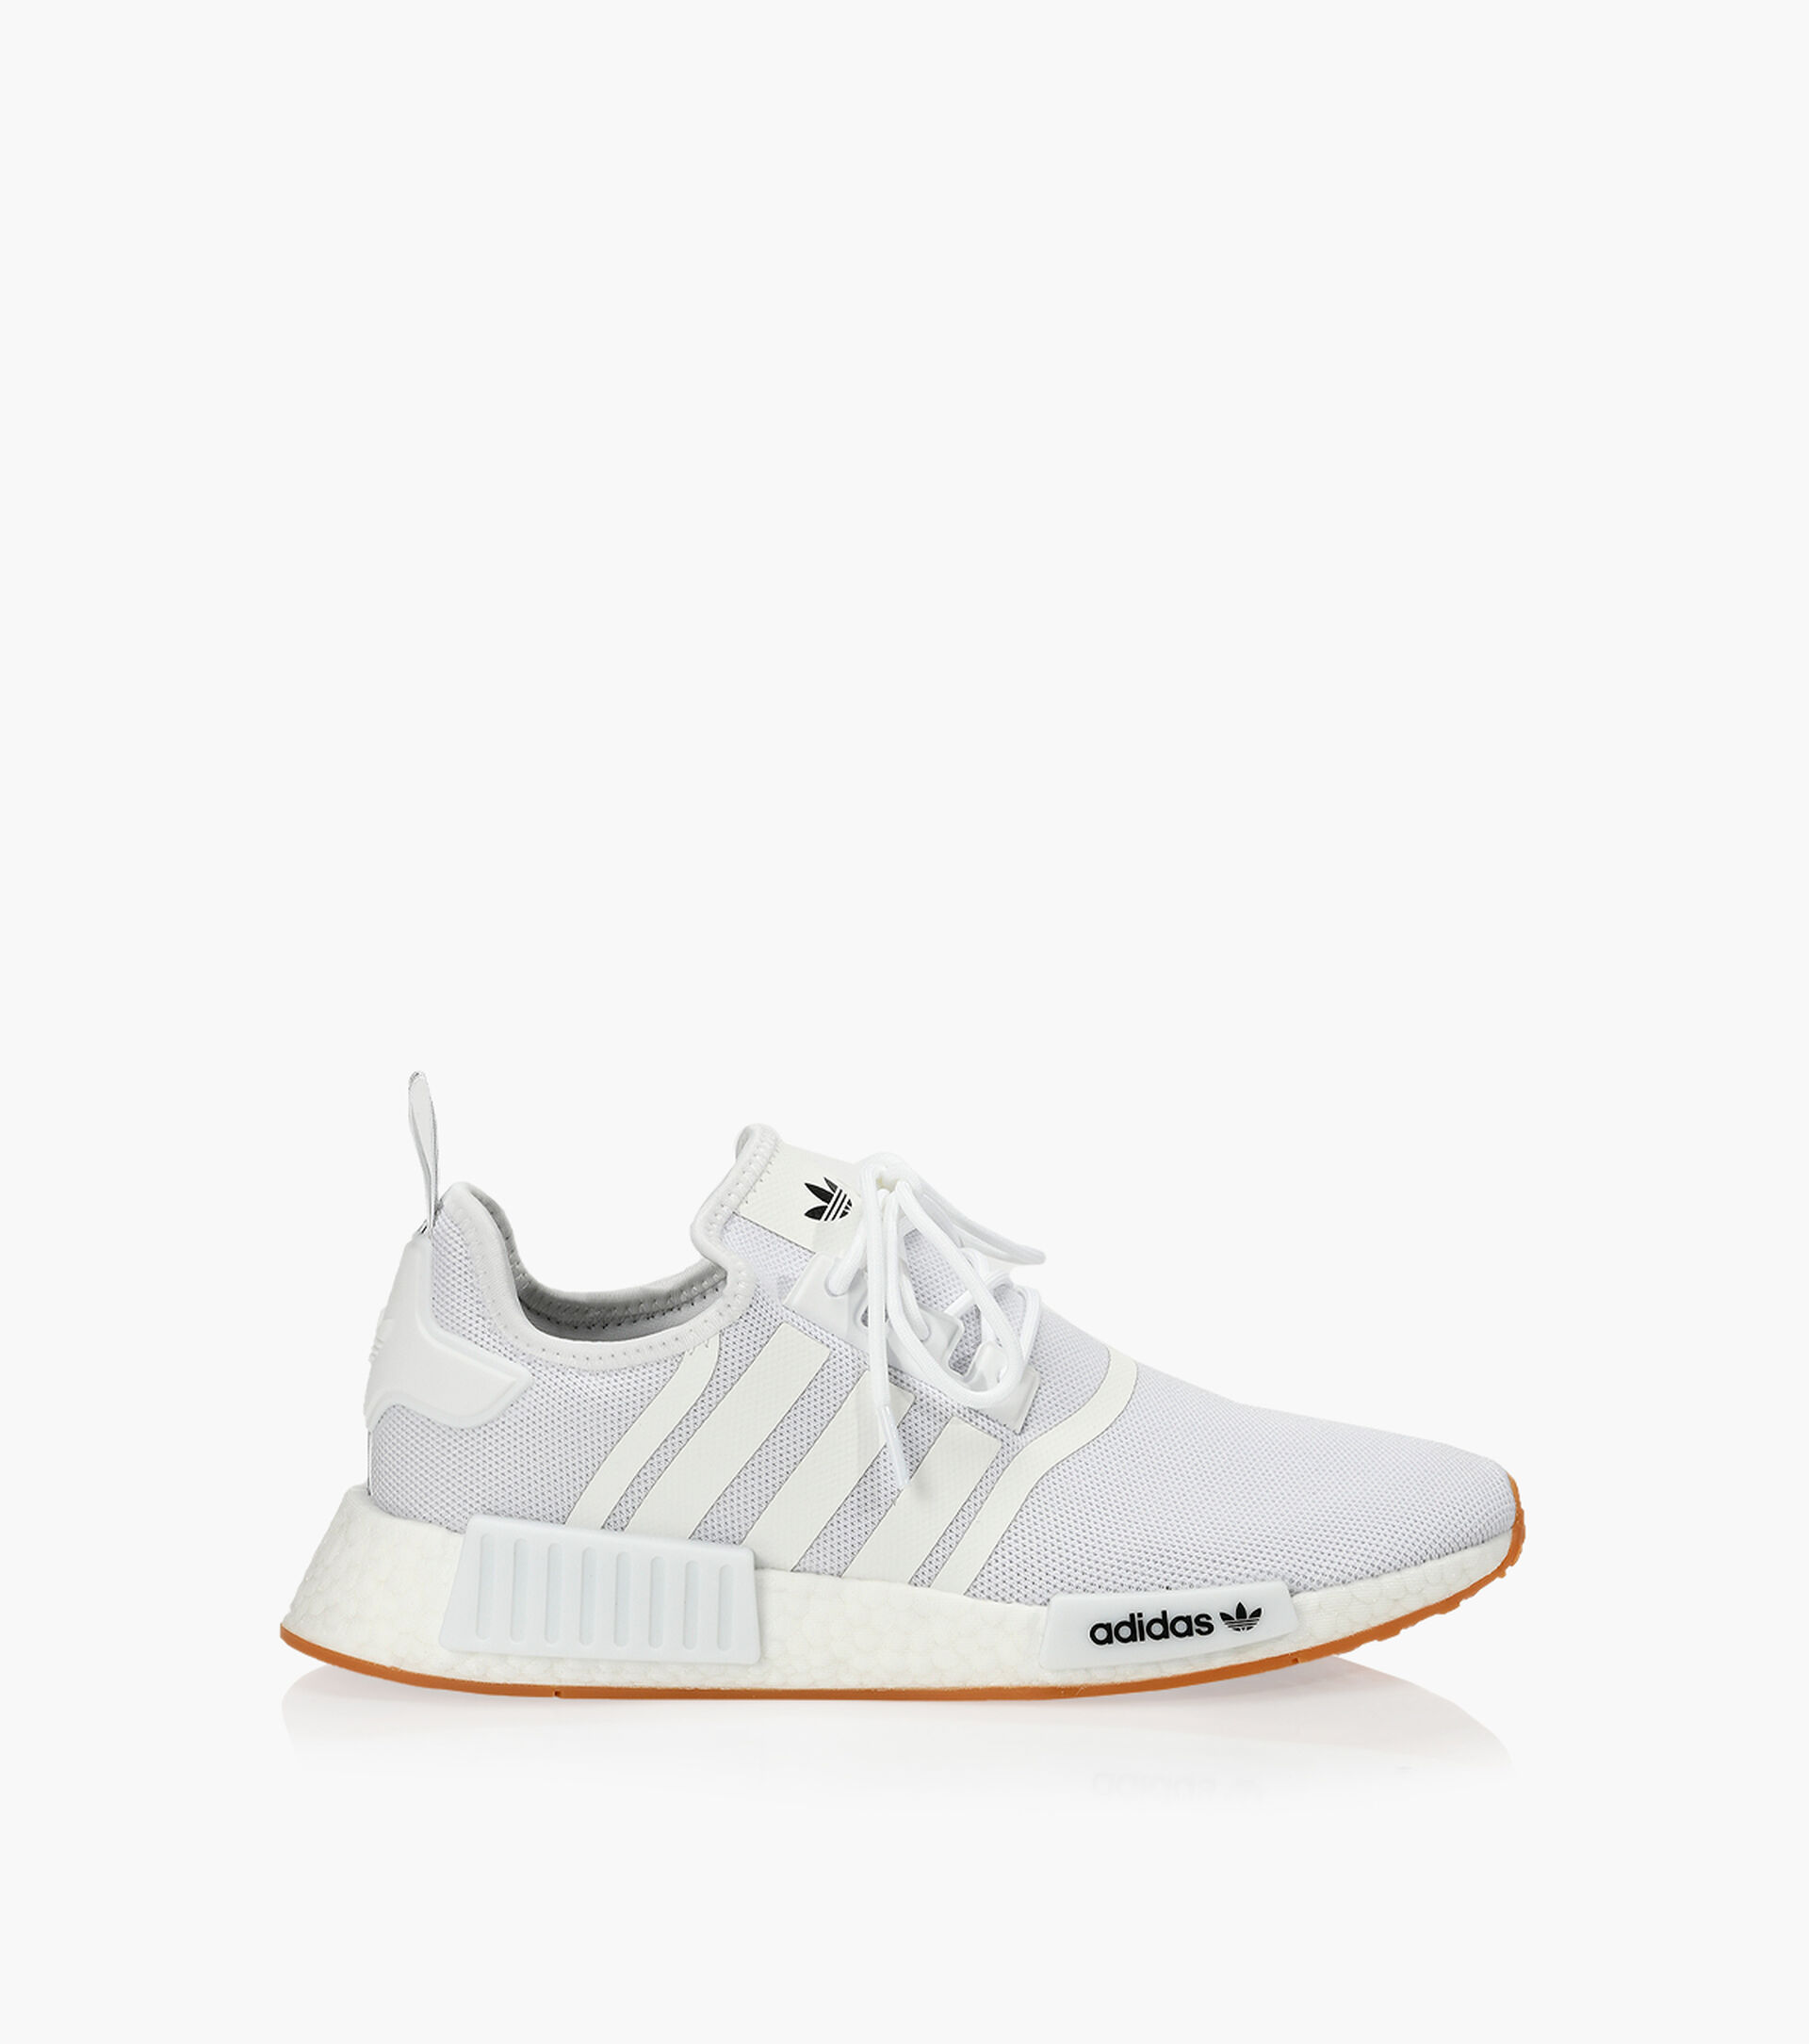 ADIDAS NMD_R1 PRIMEBLUE SHOES - Tissu | Browns Shoes